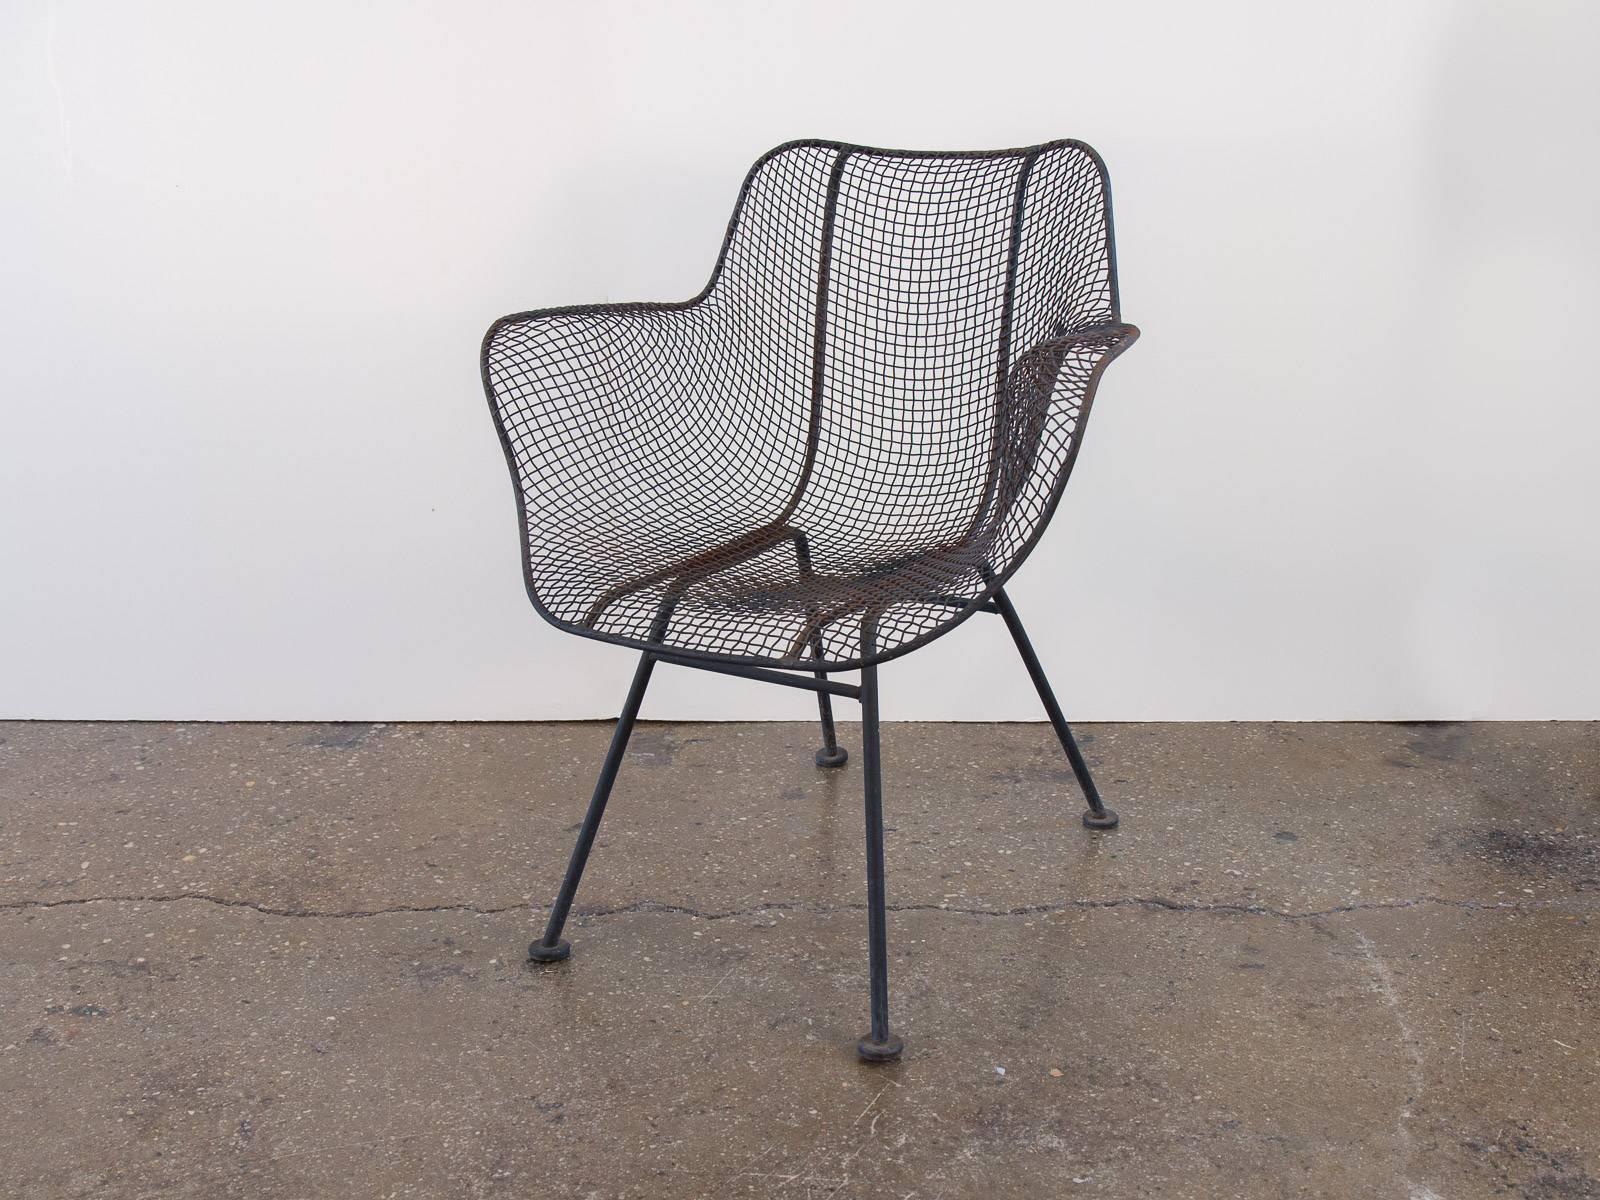 Two vintage black Sculptura chairs. The Sculptura furniture line was designed in the 1950s by Russell Woodard. This set dates to the 1960s and have their original finish. The chairs have some surface rust and need to be painted or powder-coated. All